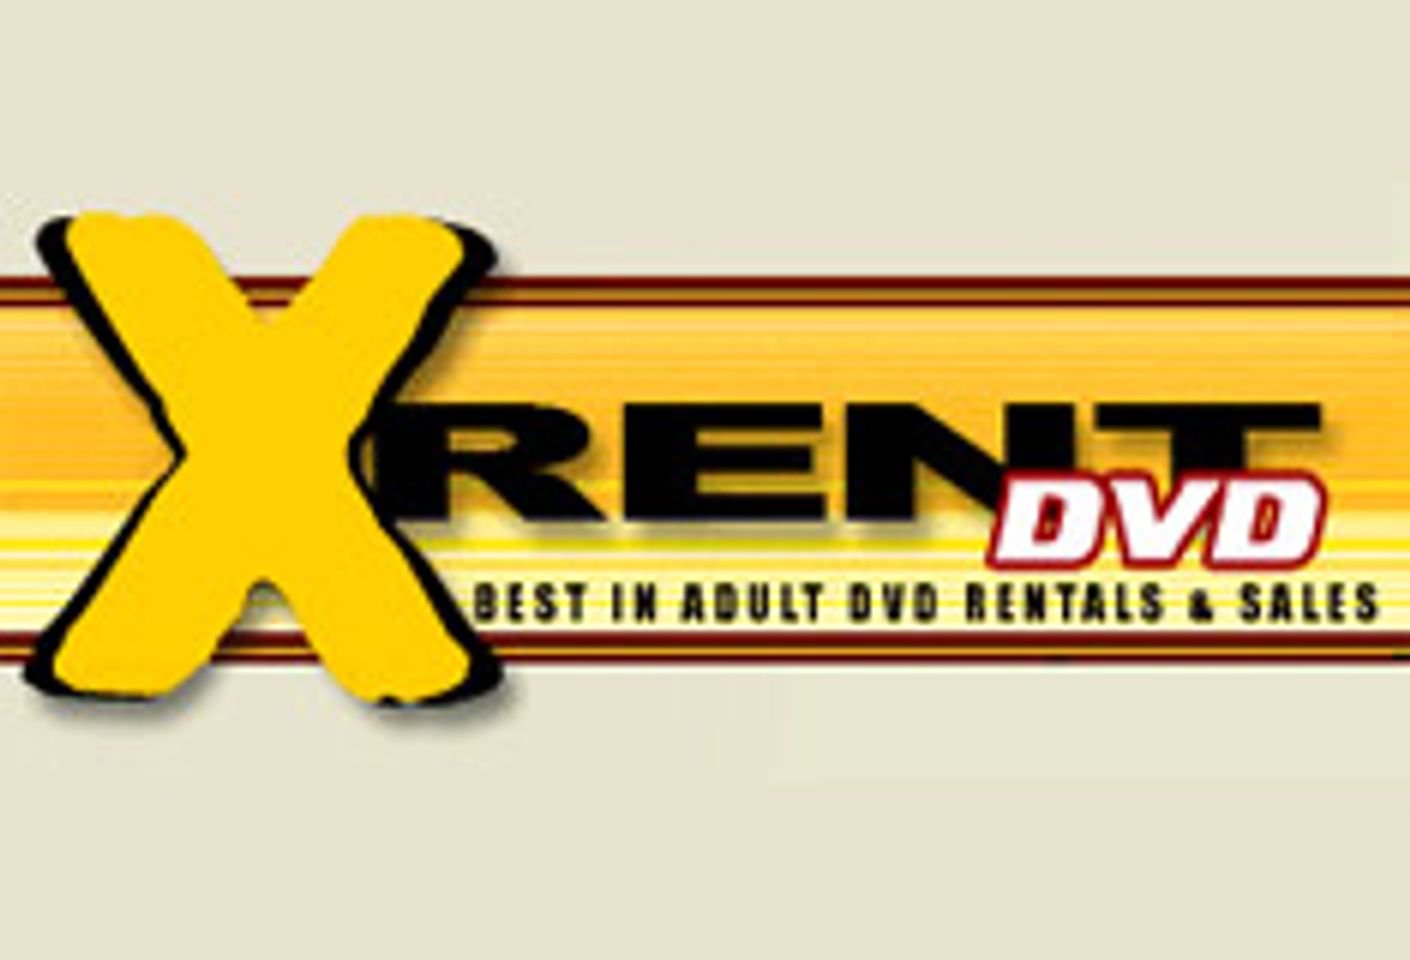 XRentDVD Offers Military Discount